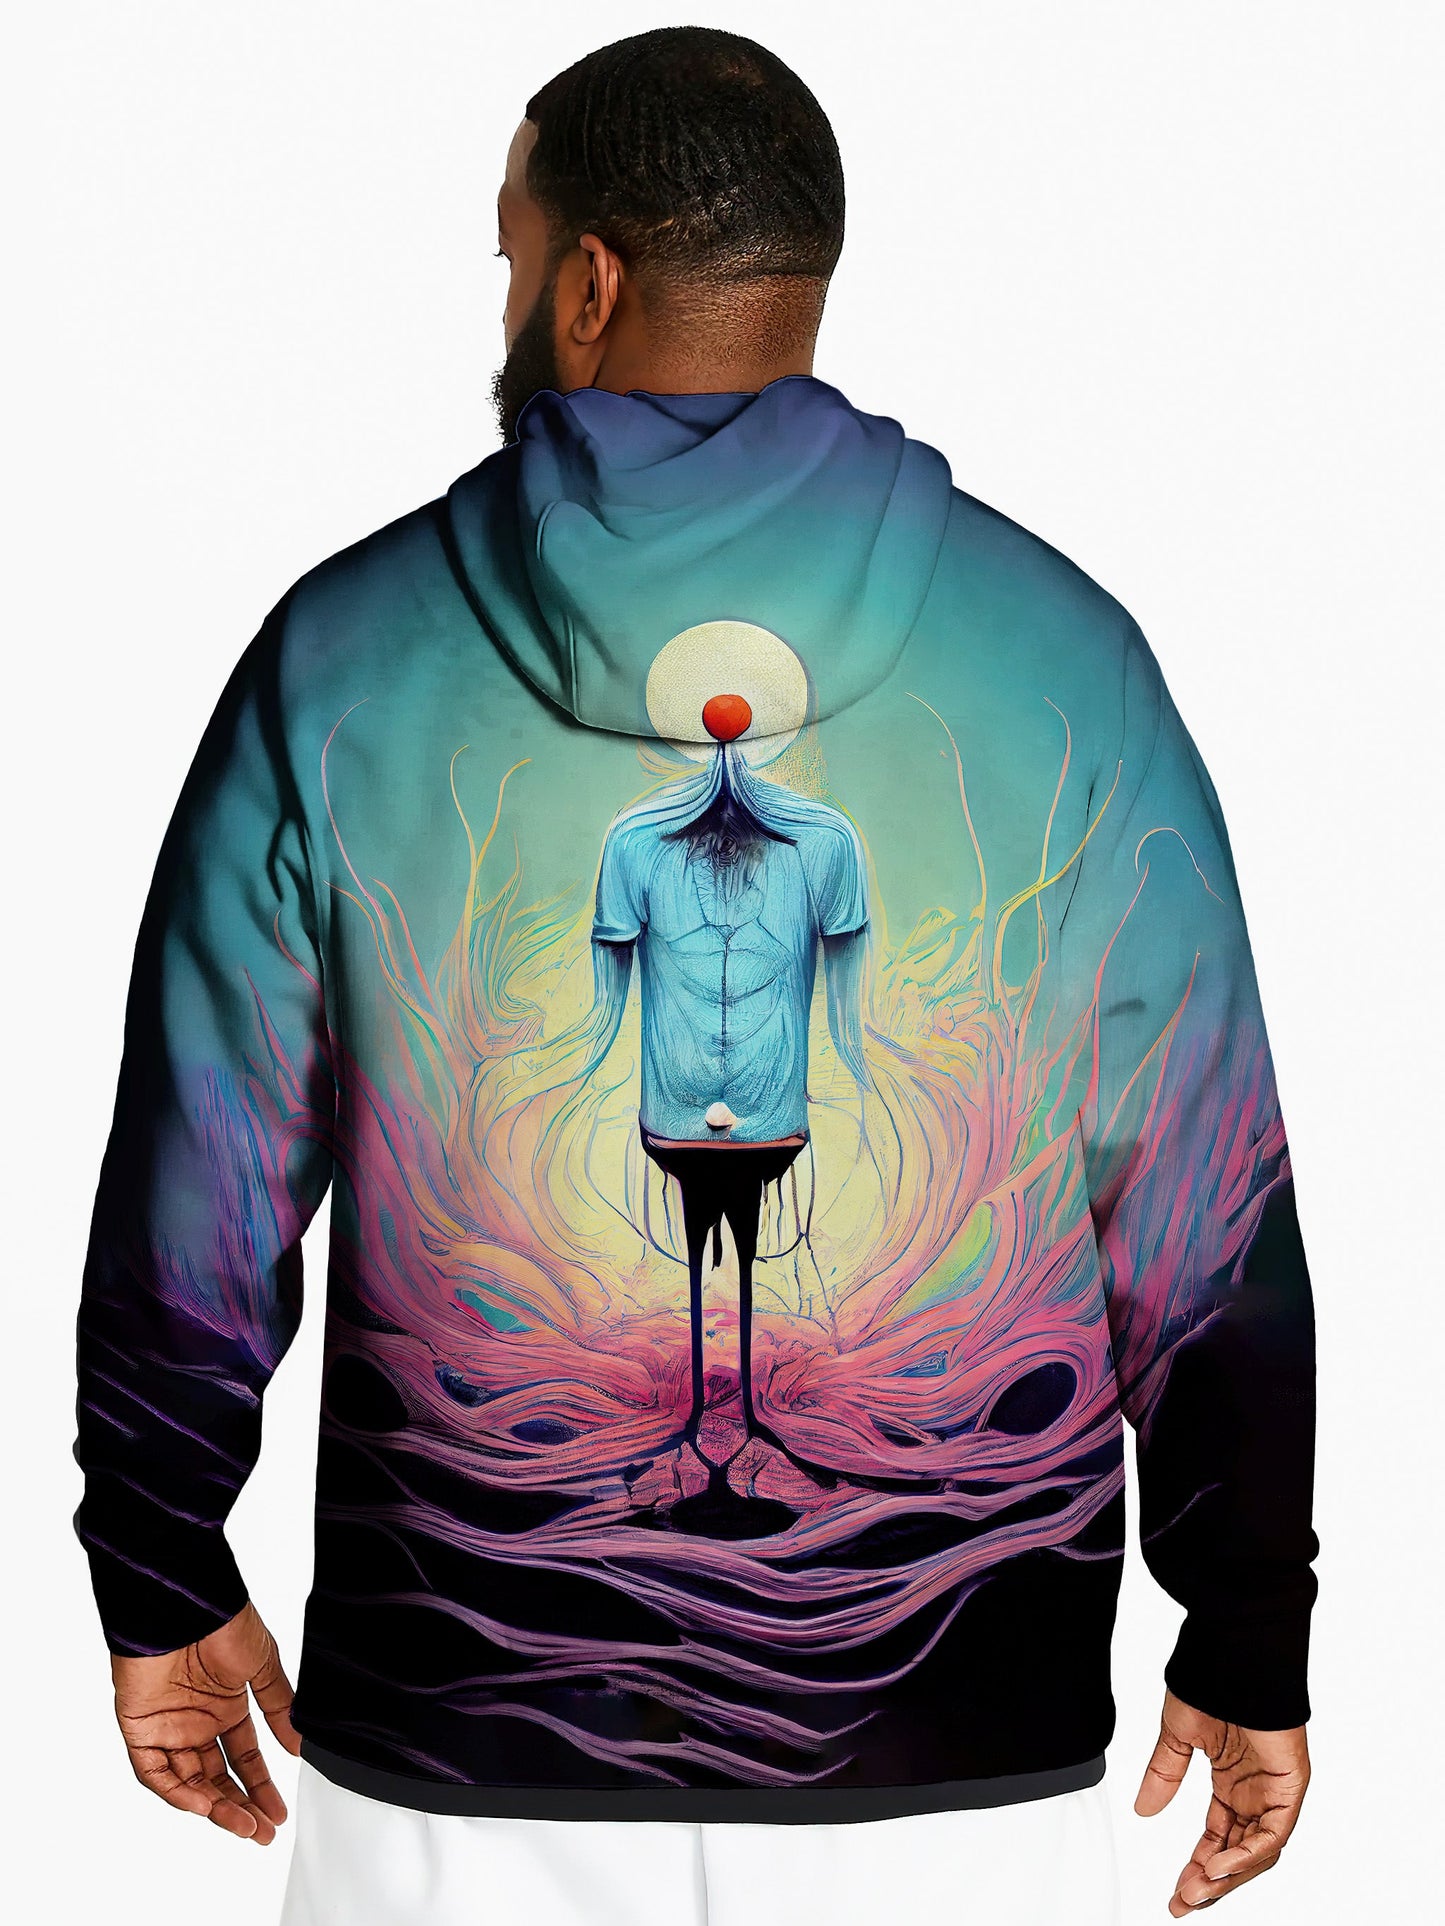 Approval Of Flame Unisex Pullover Hoodie - EDM Festival Clothing - Boogie Threads